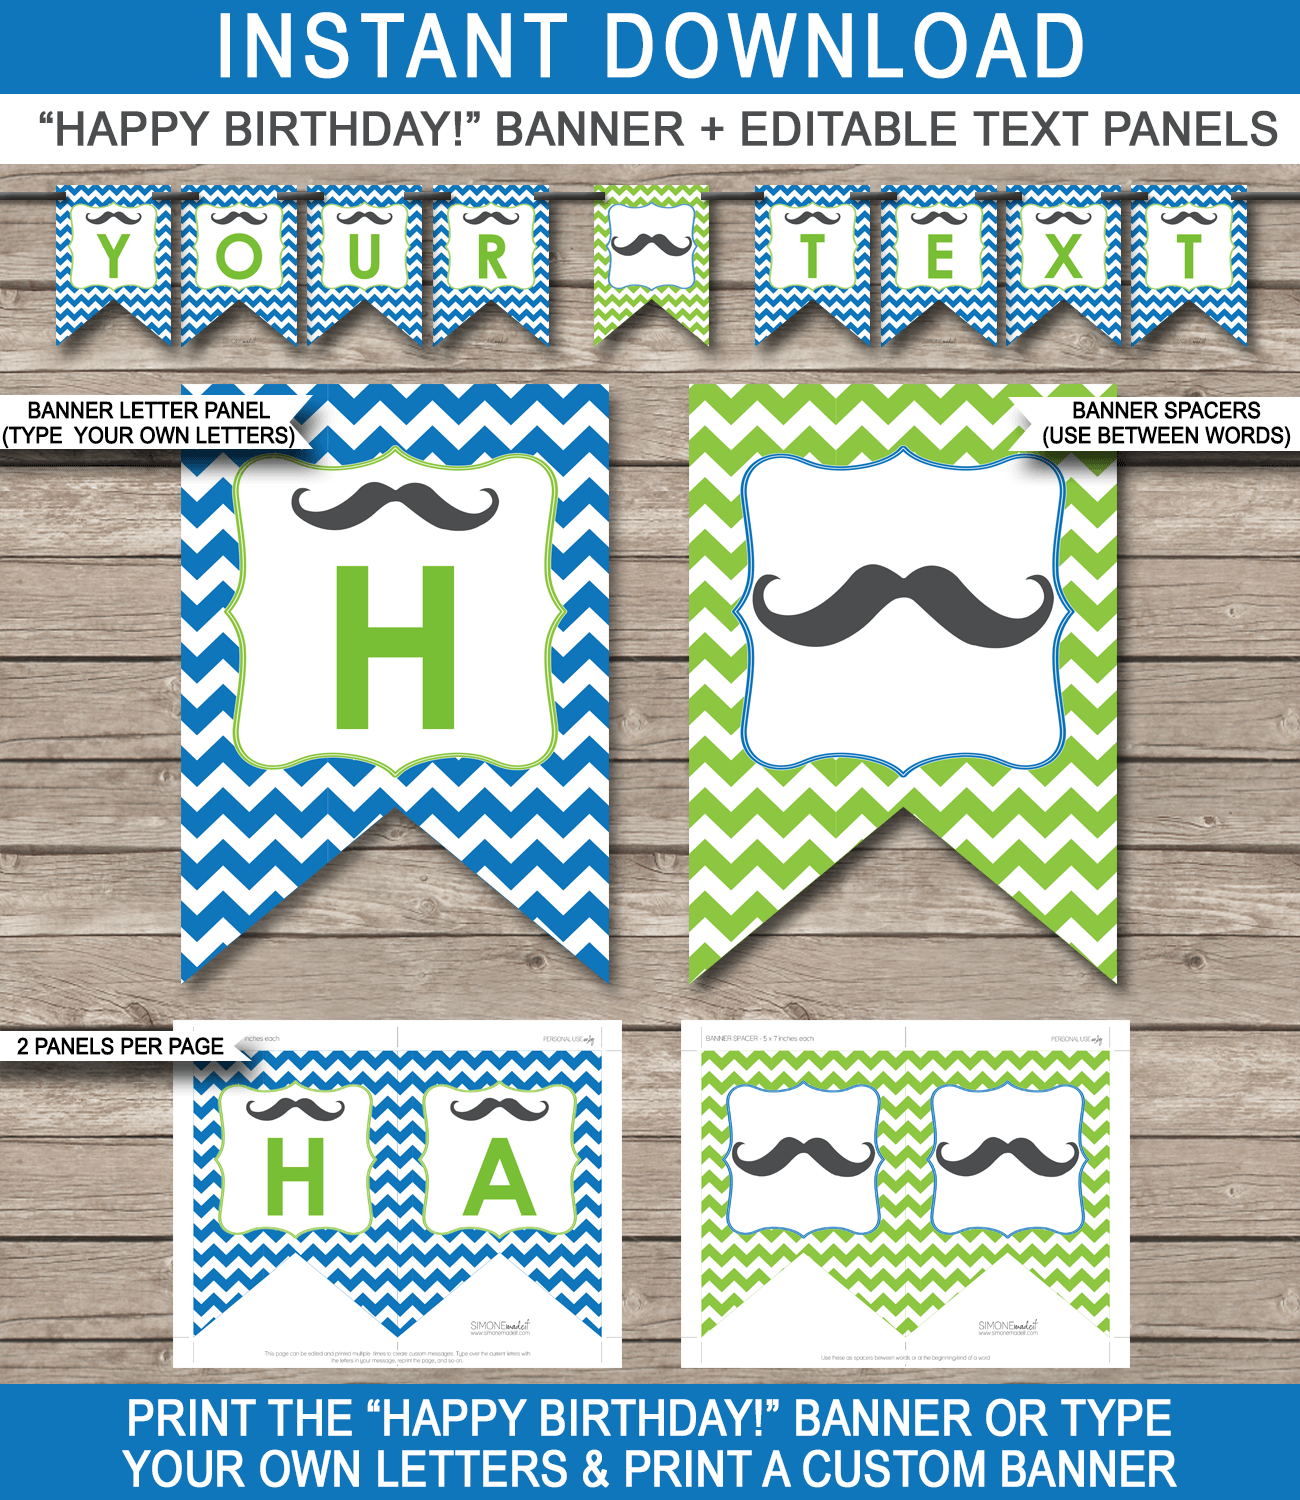 Mustache Party Banner Template - Mustache Bunting - Little Man - Happy Birthday Banner - Birthday Party - Editable and Printable DIY Template - INSTANT DOWNLOAD $4.50 via simonemadeit.com